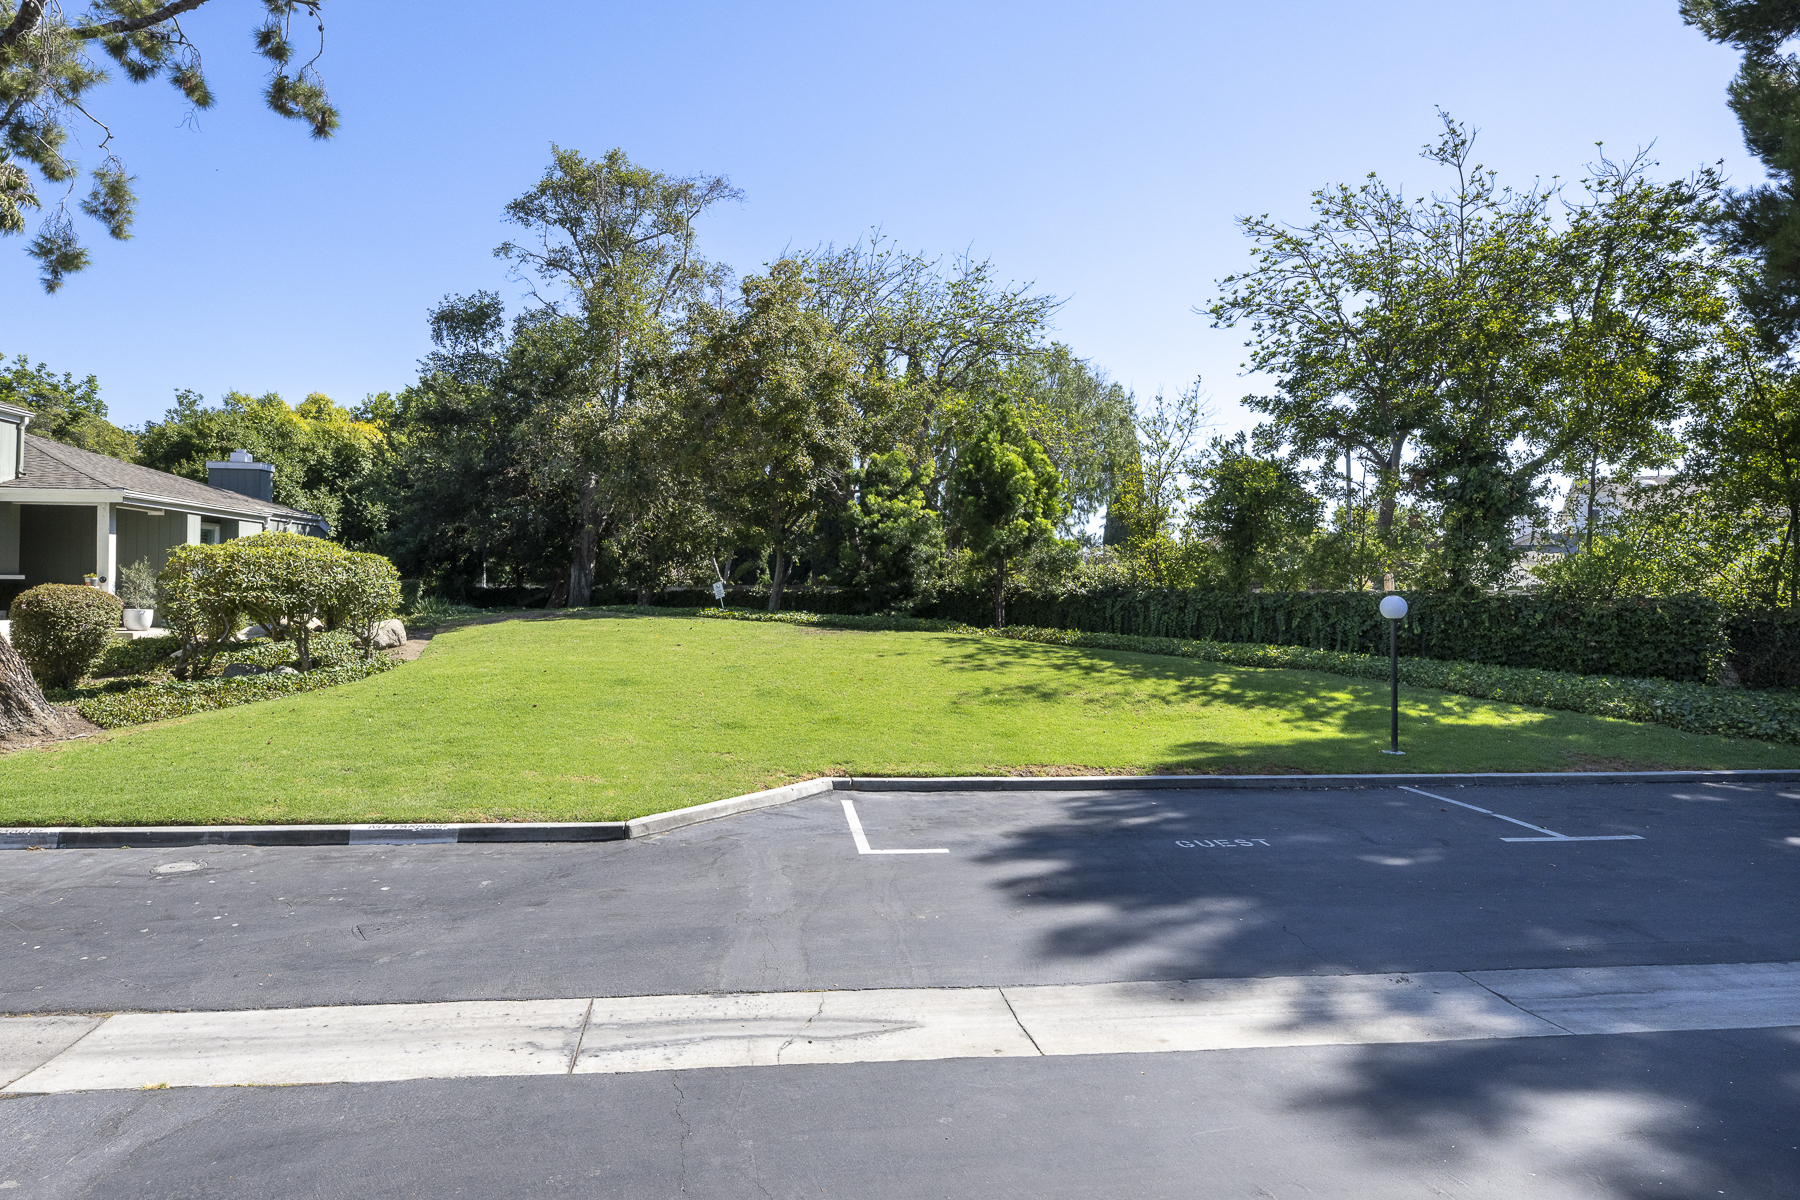 3424 Pinebrook Costa Mesa CA 92626: Outdoor community with green lawn and parking space.